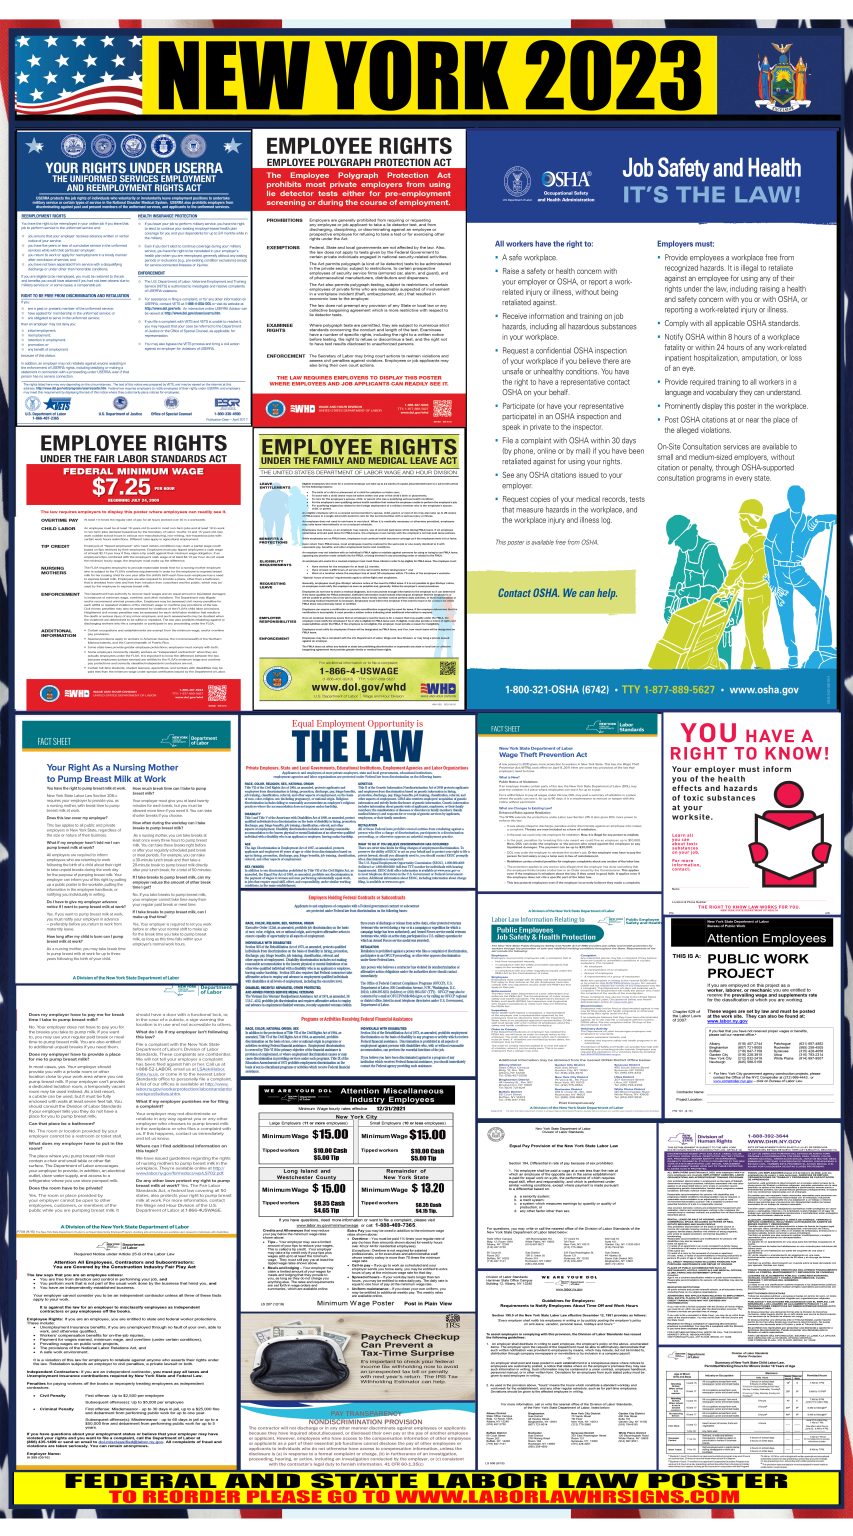 2023-new-york-labor-law-posters-state-federal-osha-laborlawhrsigns